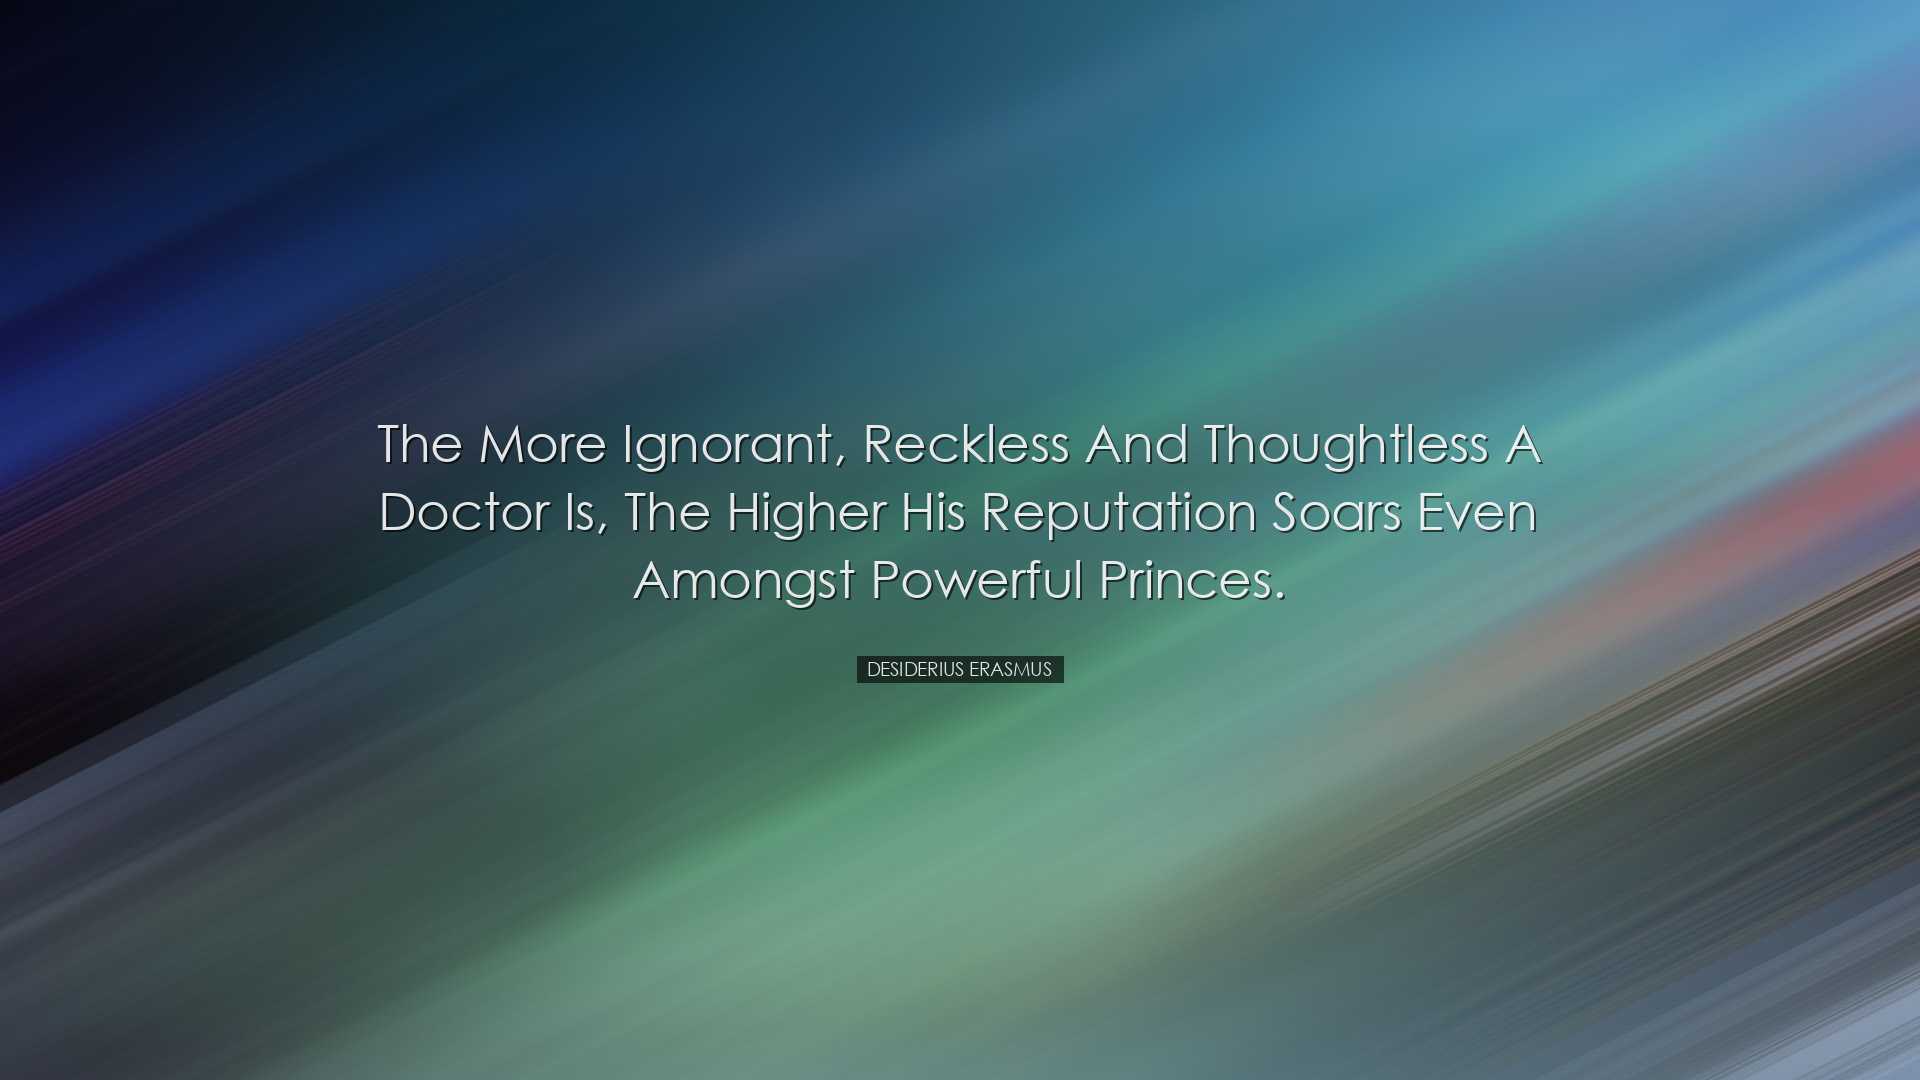 The more ignorant, reckless and thoughtless a doctor is, the highe